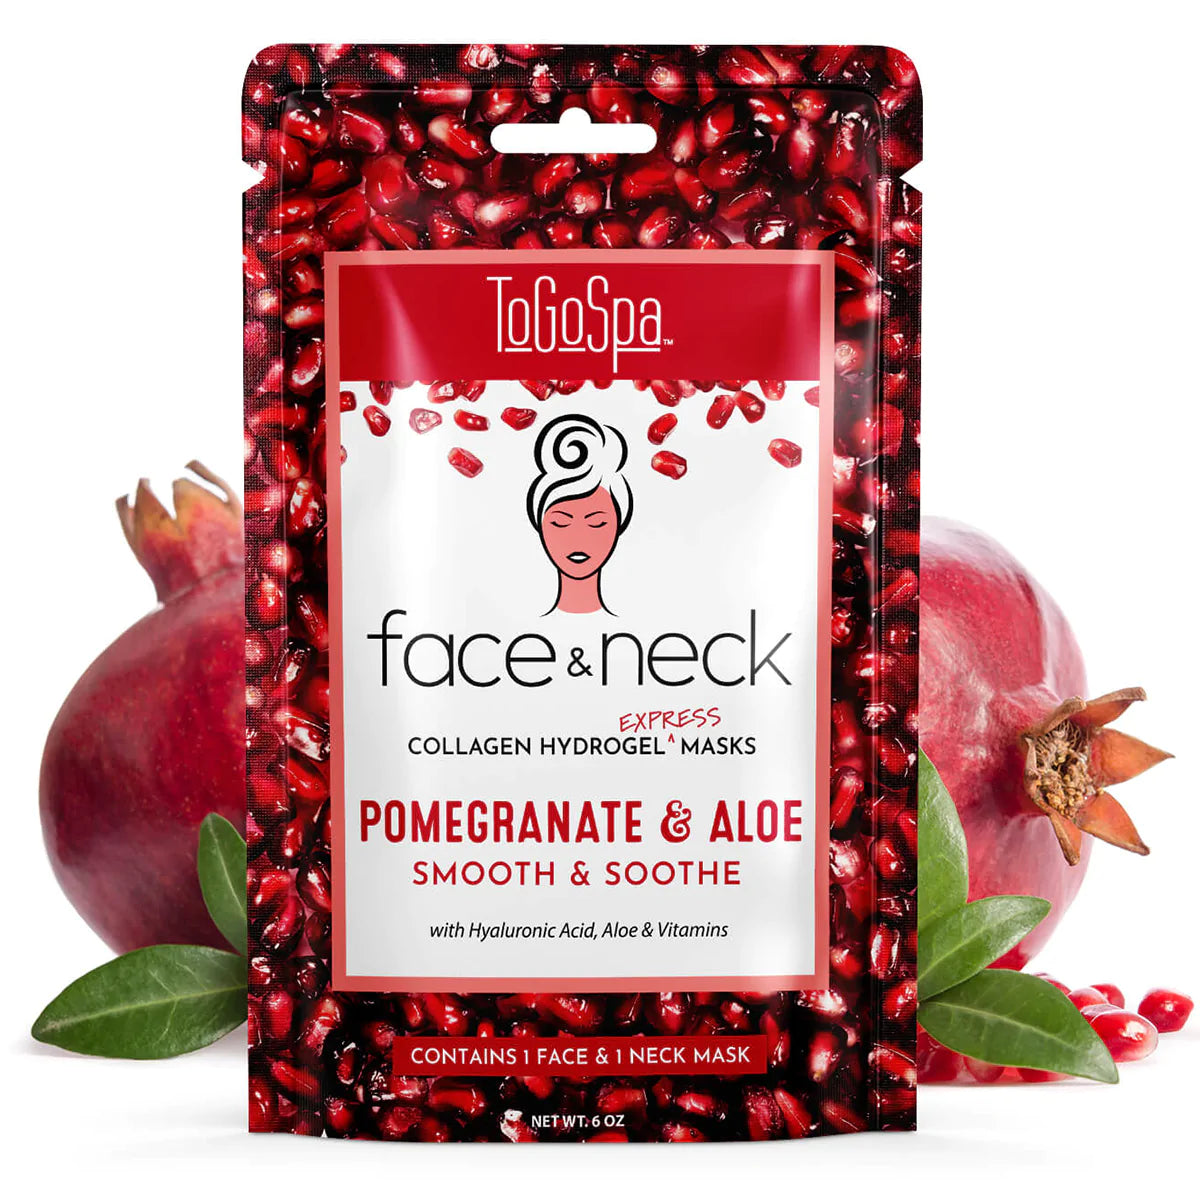 Pomegranate Face and Neck Express | To Go Spa